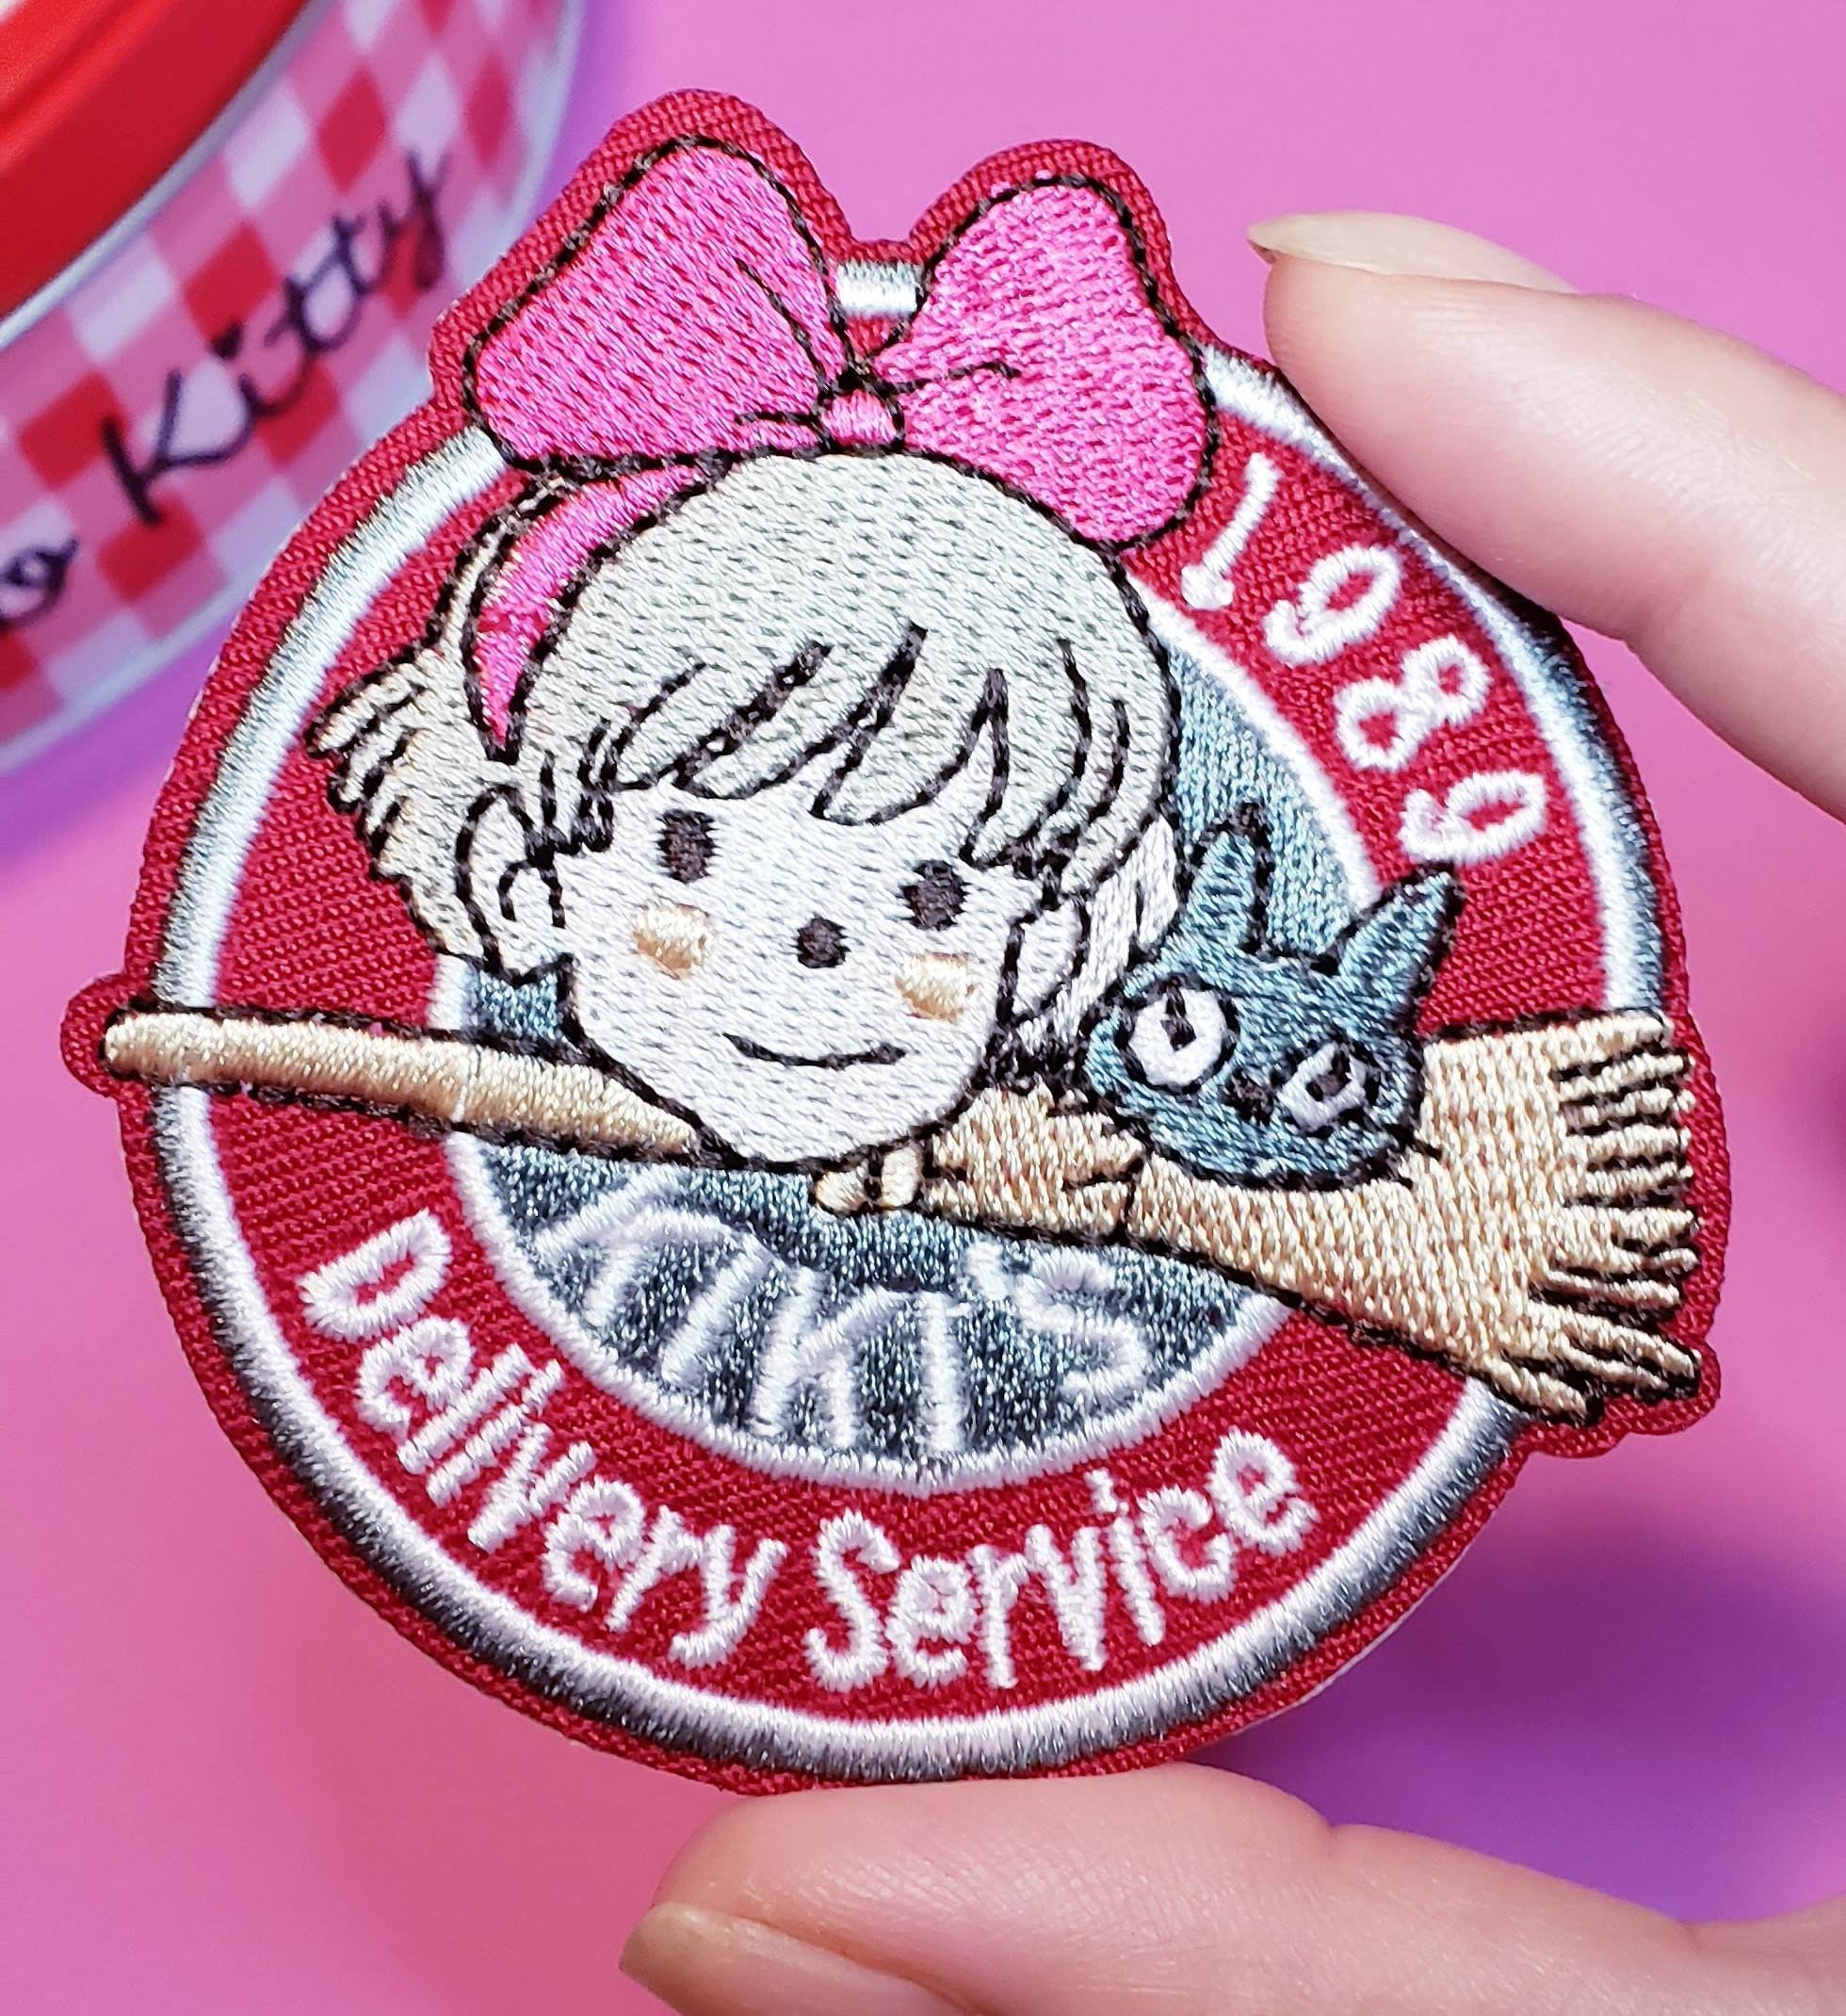 3pcs Iron On Patches for Clothing, Embroidered Sew On Cute Cartoon Japan  Anime Decoration Patches for Jackets Clothes Shirts Backpacks